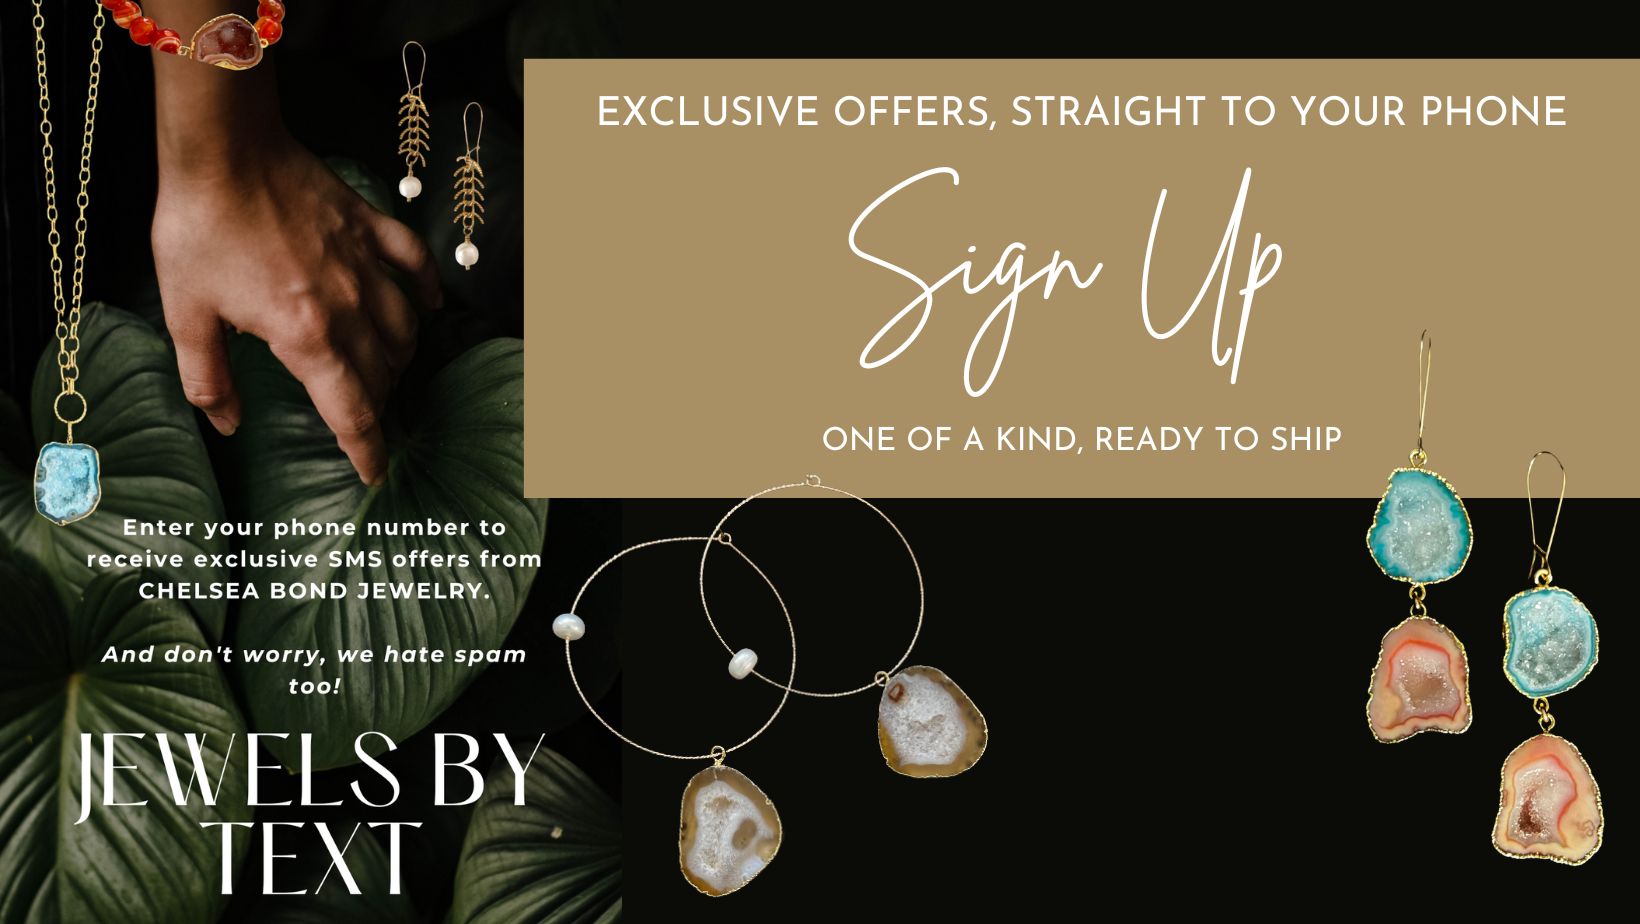 sign up for jewelry offers by text.